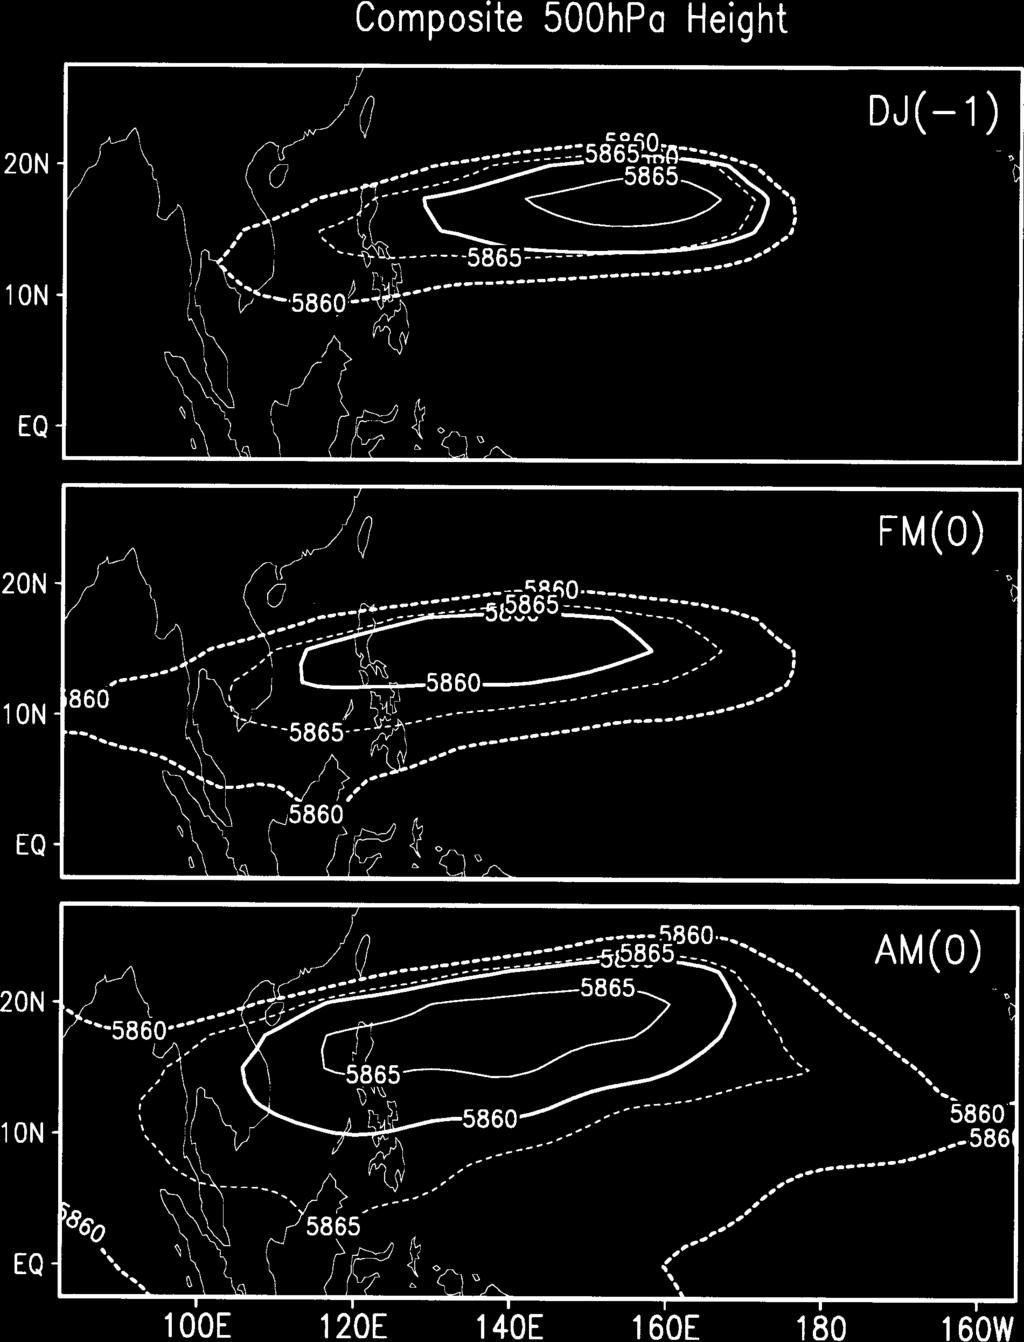 The strength and shape of WPSH between the early and late monsoon onset composites differ remarkably. The early onset is preceded by a weakening and eastward withdrawal of the subtropical ridge.